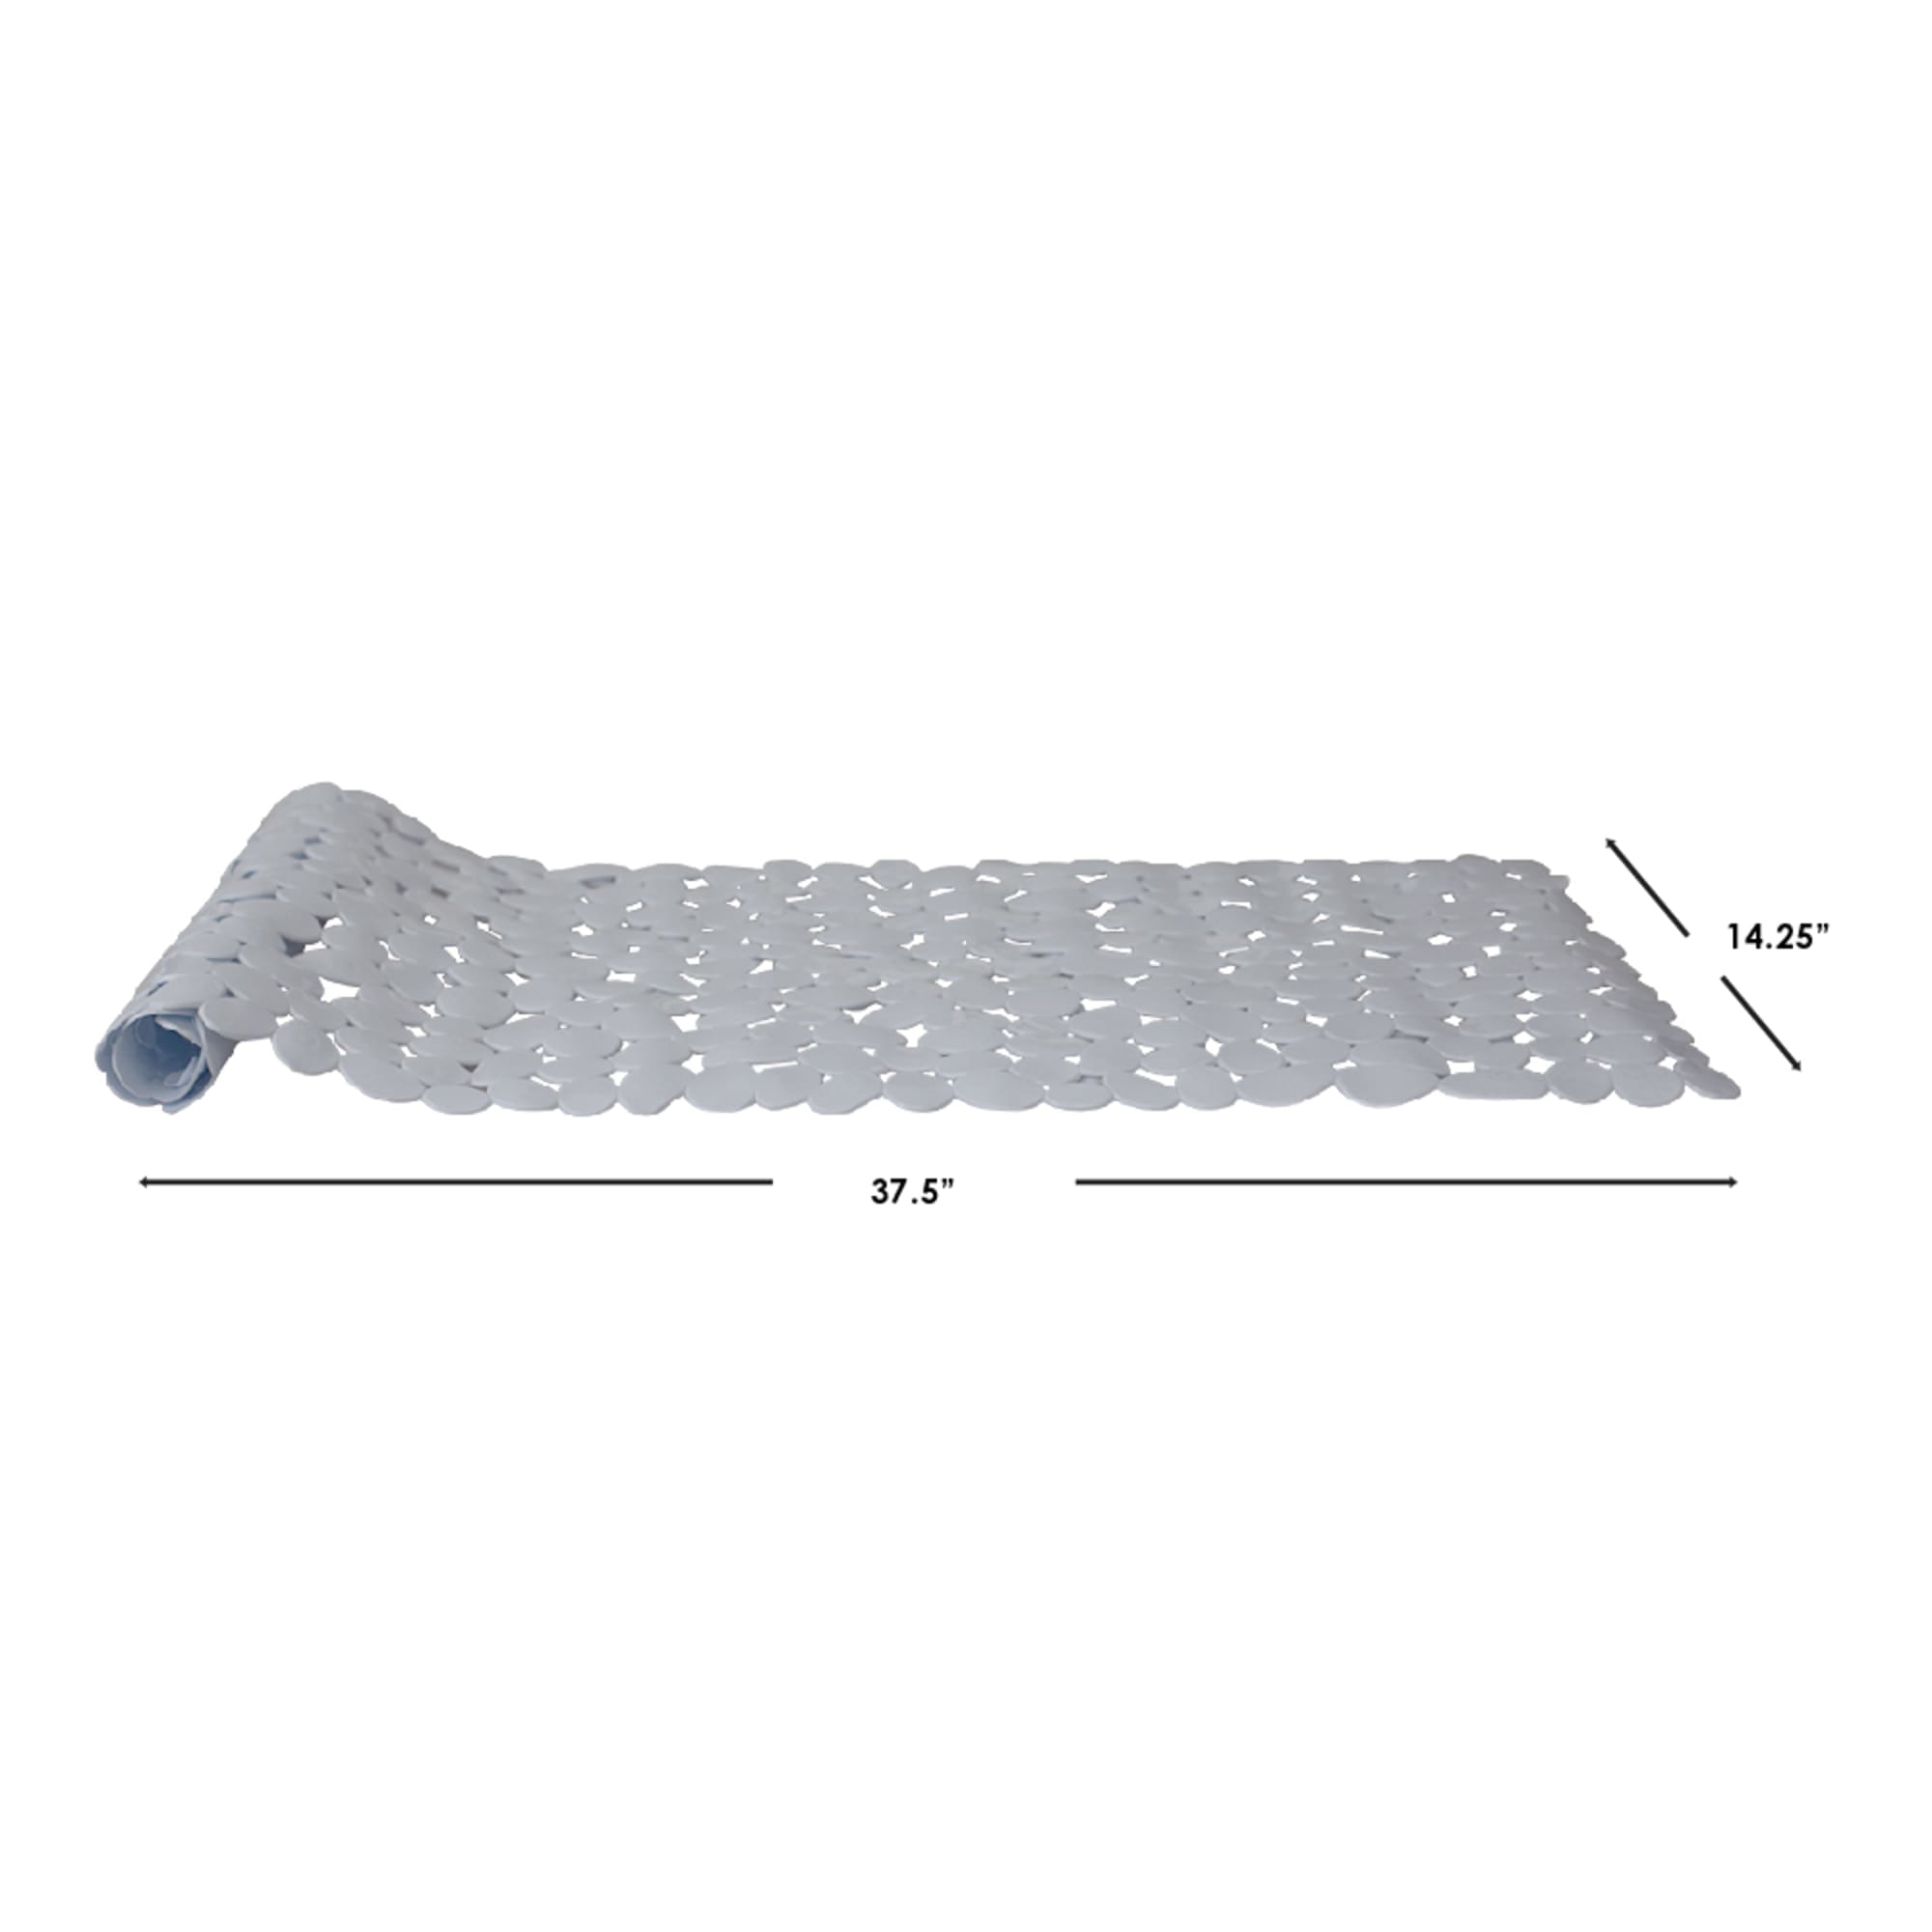 Home Basics Anti-Slip Quick Drain Pebble Plastic Bath Mat with Back Suction Cups, White $6 EACH, CASE PACK OF 12